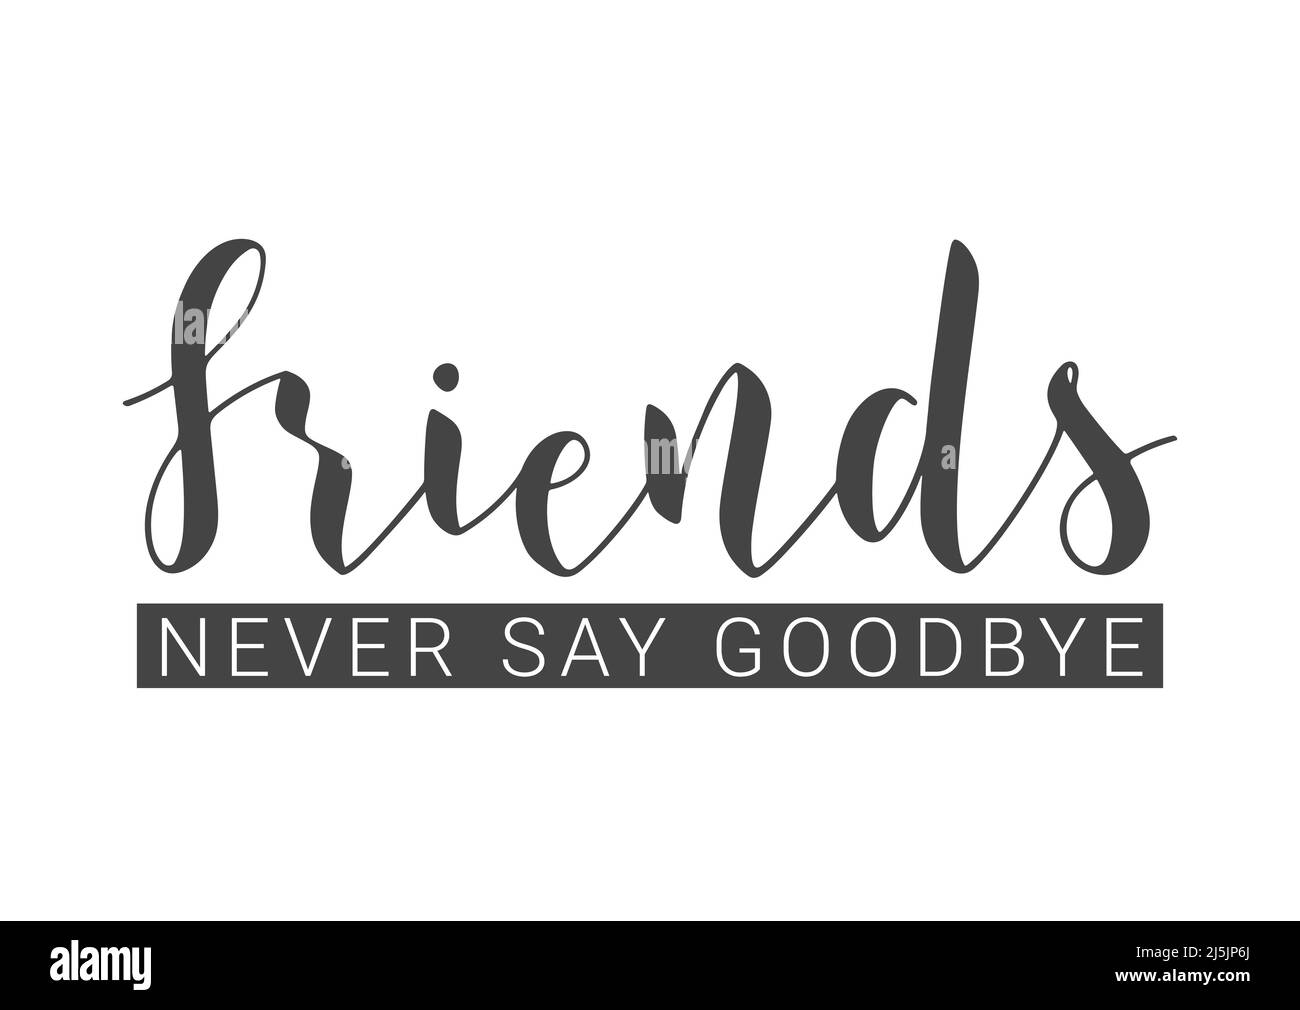 Handwritten Lettering of Friends Never Say Goodbye. Template for Banner, Invitation, Party, Postcard, Poster, Print, Sticker or Web Product. Stock Vector